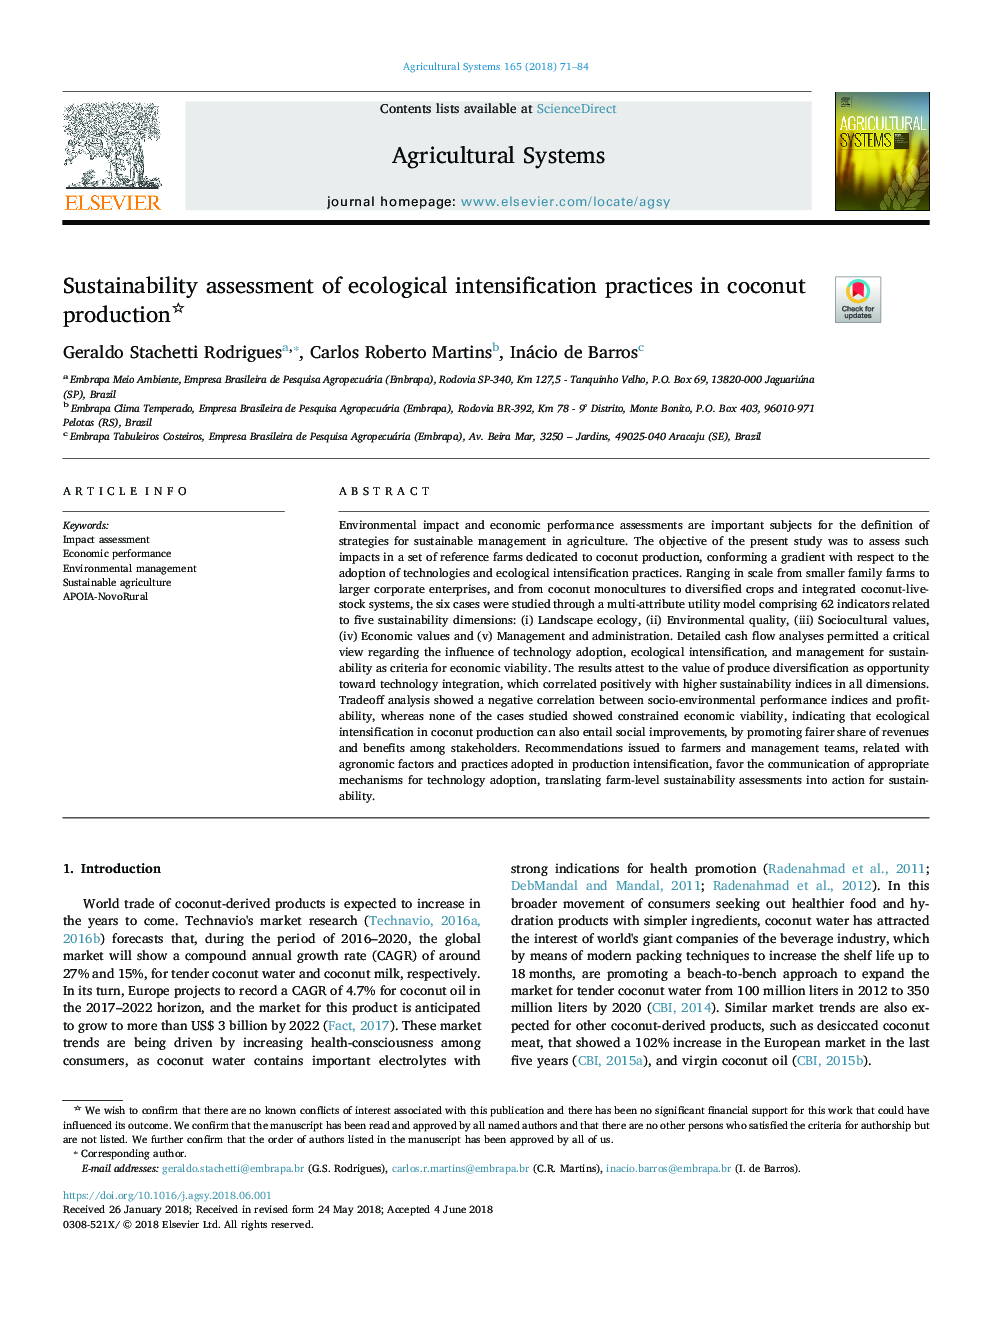 Sustainability assessment of ecological intensification practices in coconut production